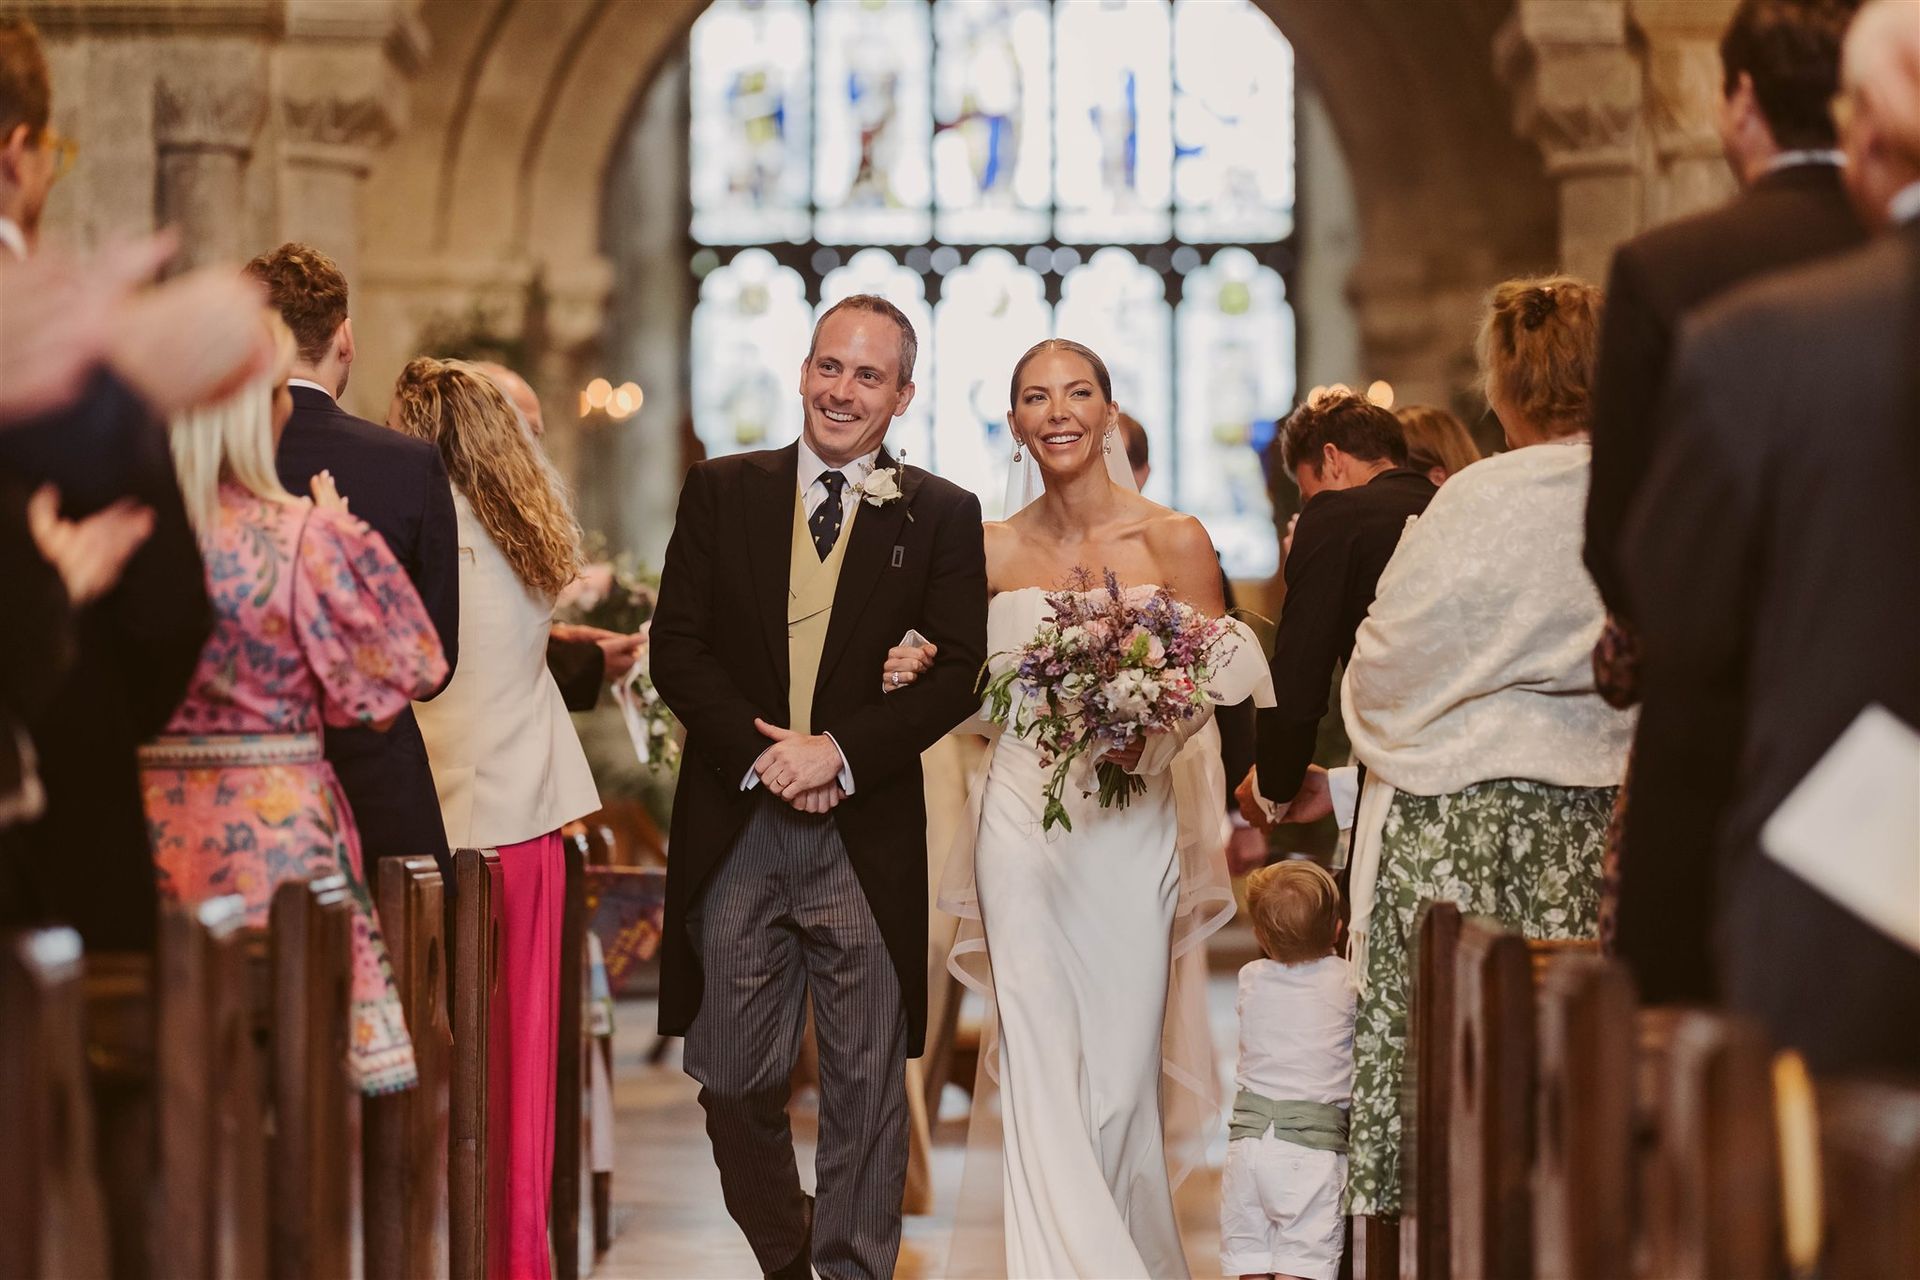 Bride and Groom walking back up the aisle in a church after getting married - co-ordinated by Tasha Mae Wedding Co-ordinator.